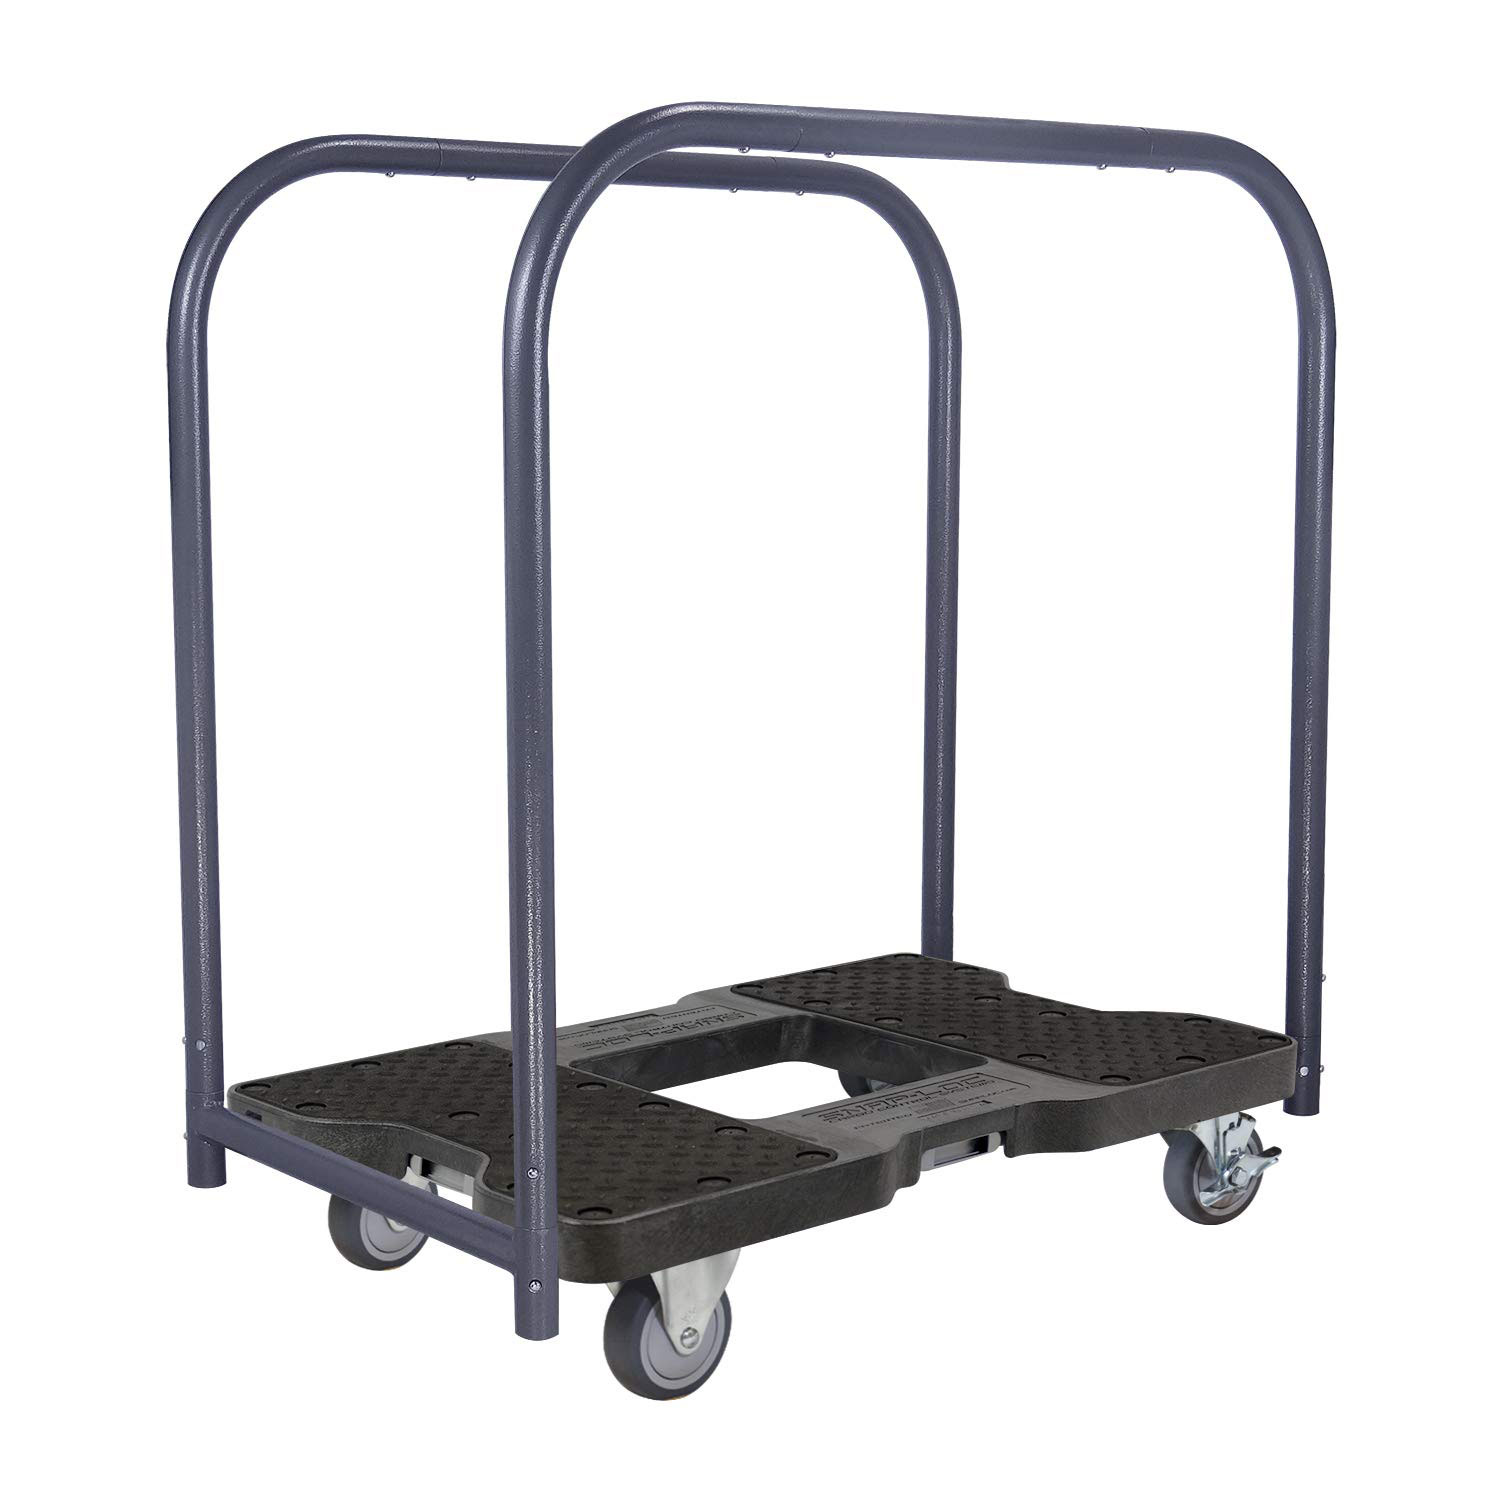 Snap Loc Professional Panel Moving Platform Dolly Cart with 1200 Pound Capacity - image 1 of 7